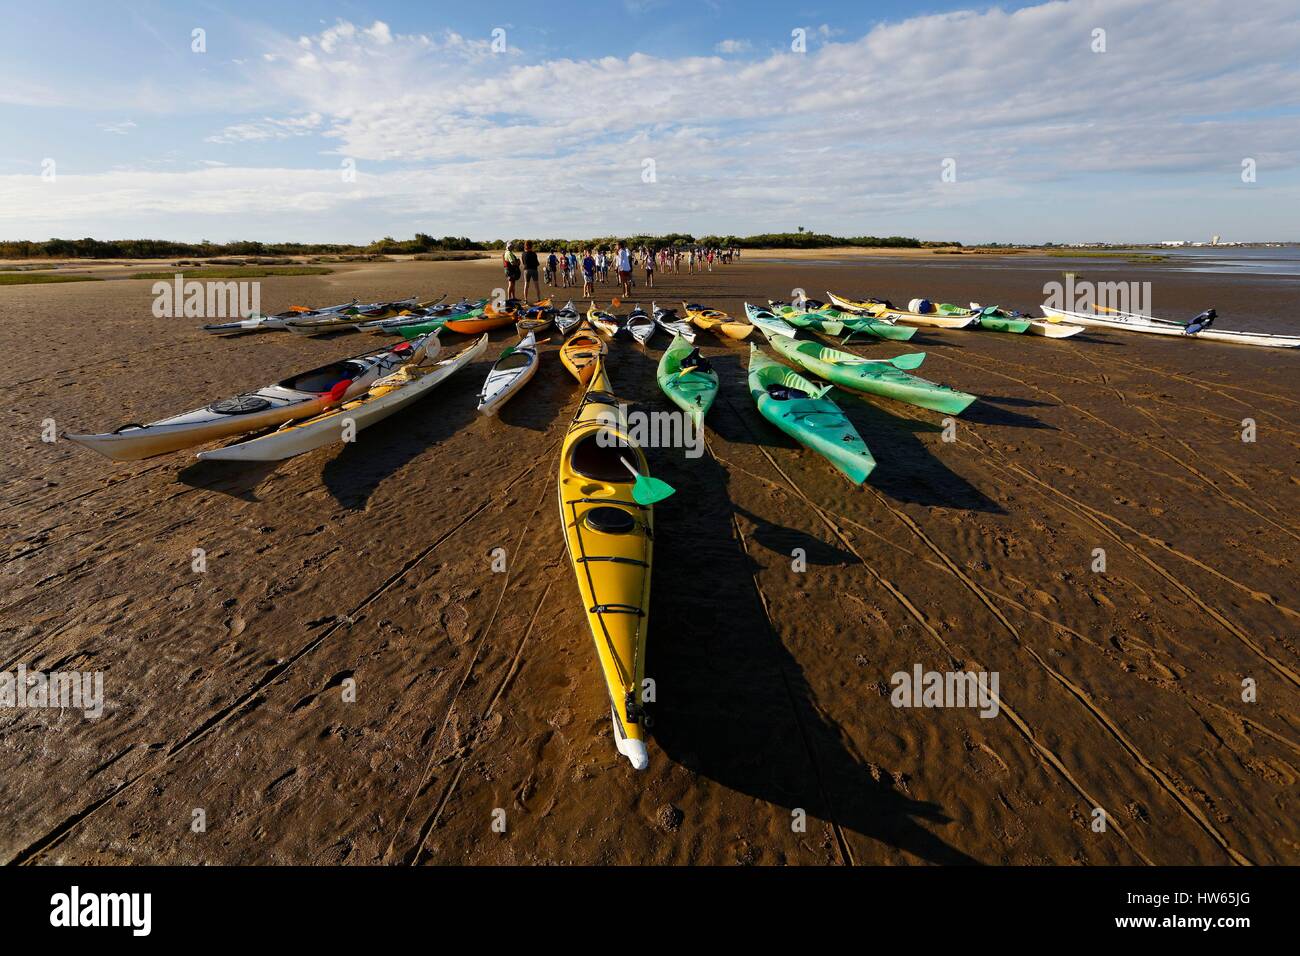 France, Gironde, Bassin d'Arcachon, Le Teich, Leyre river delta, kayaking on the Leyre Stock Photo